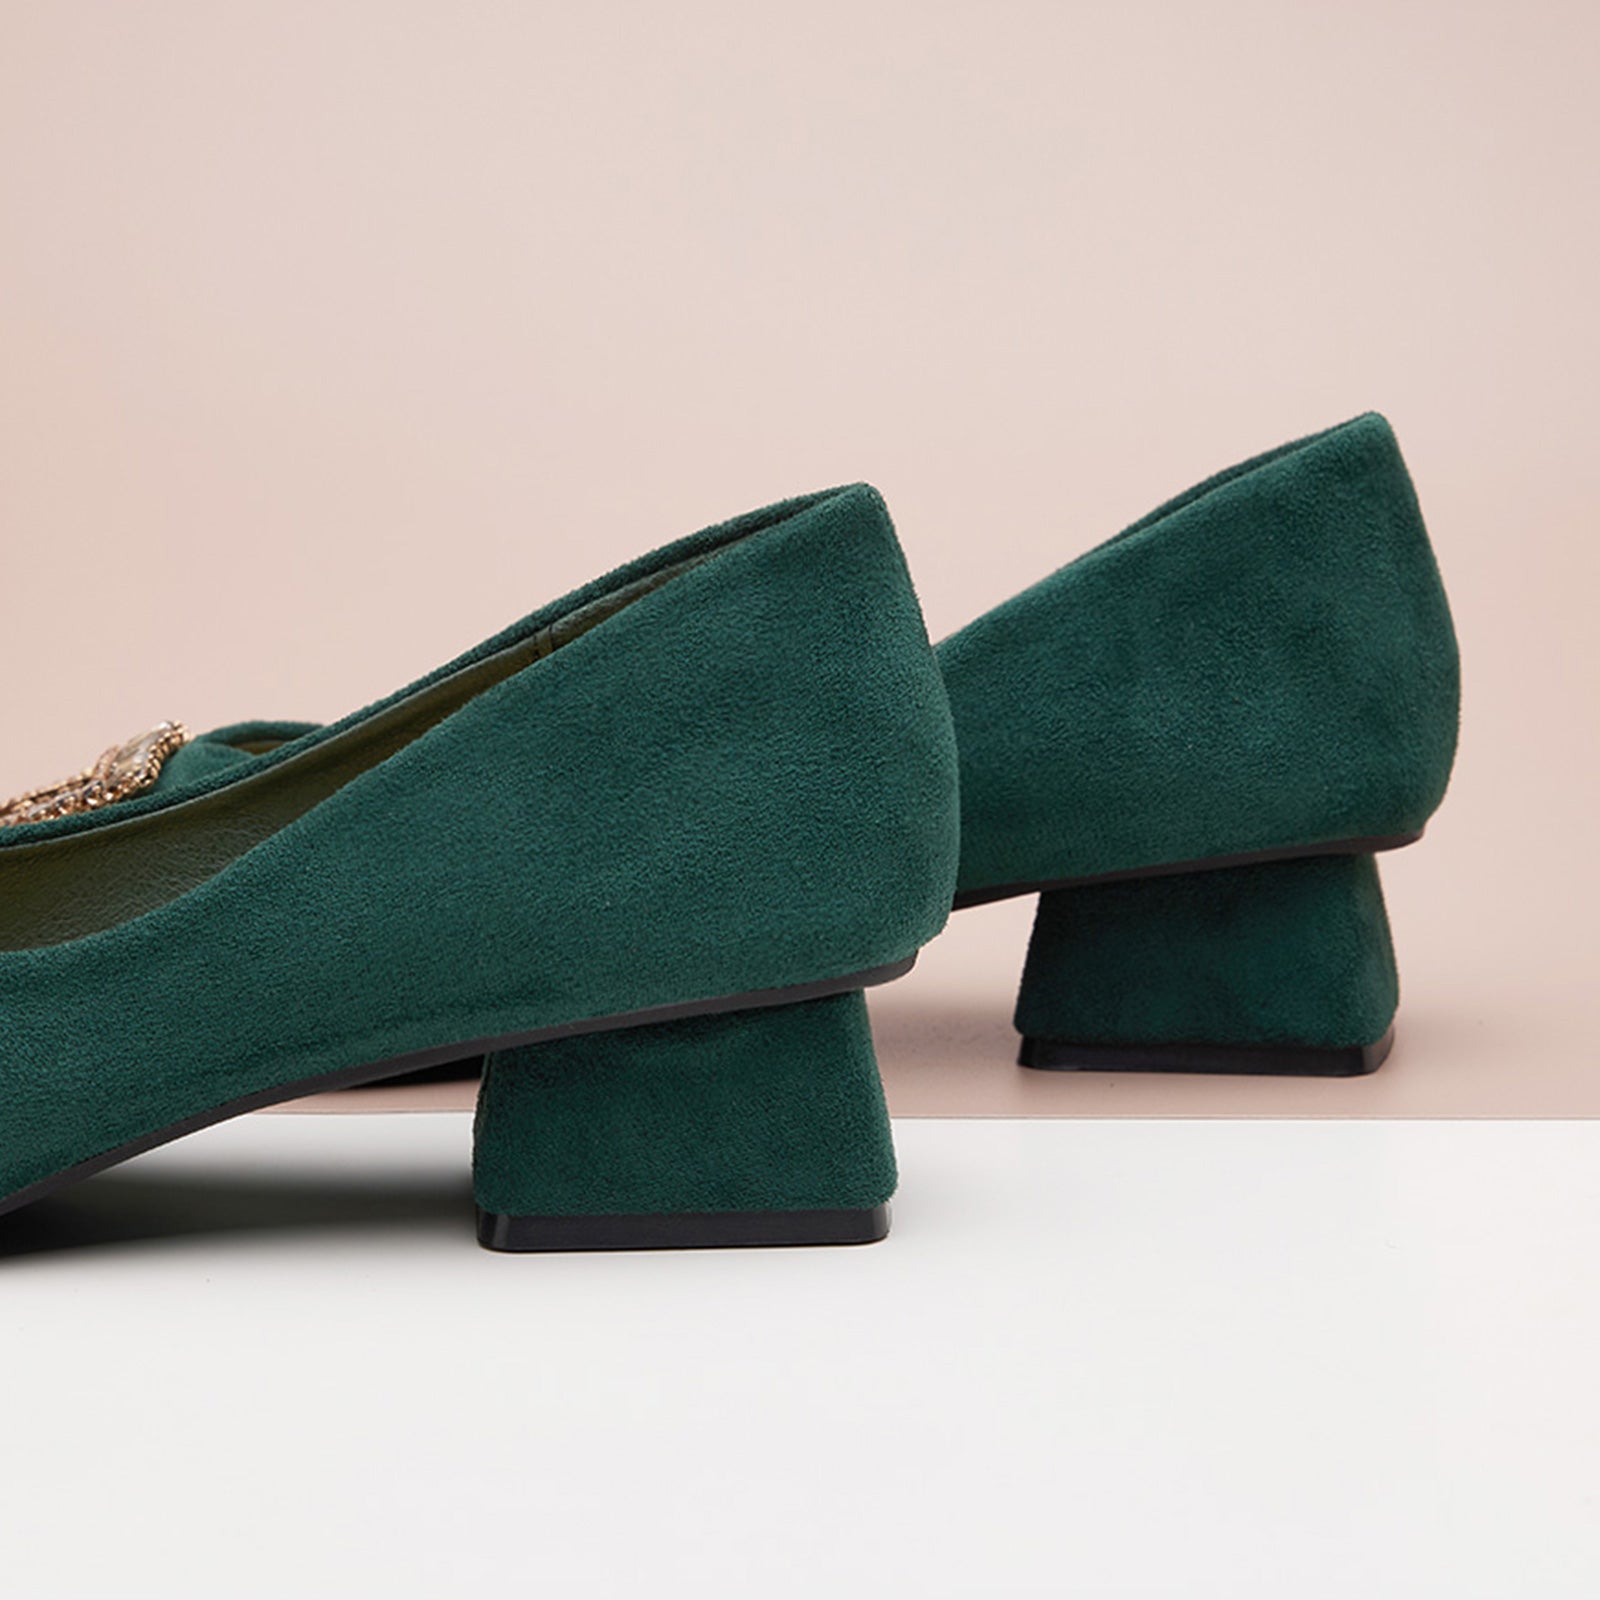 Green Suede Pumps adorned with embellishments, a fresh and stylish choice